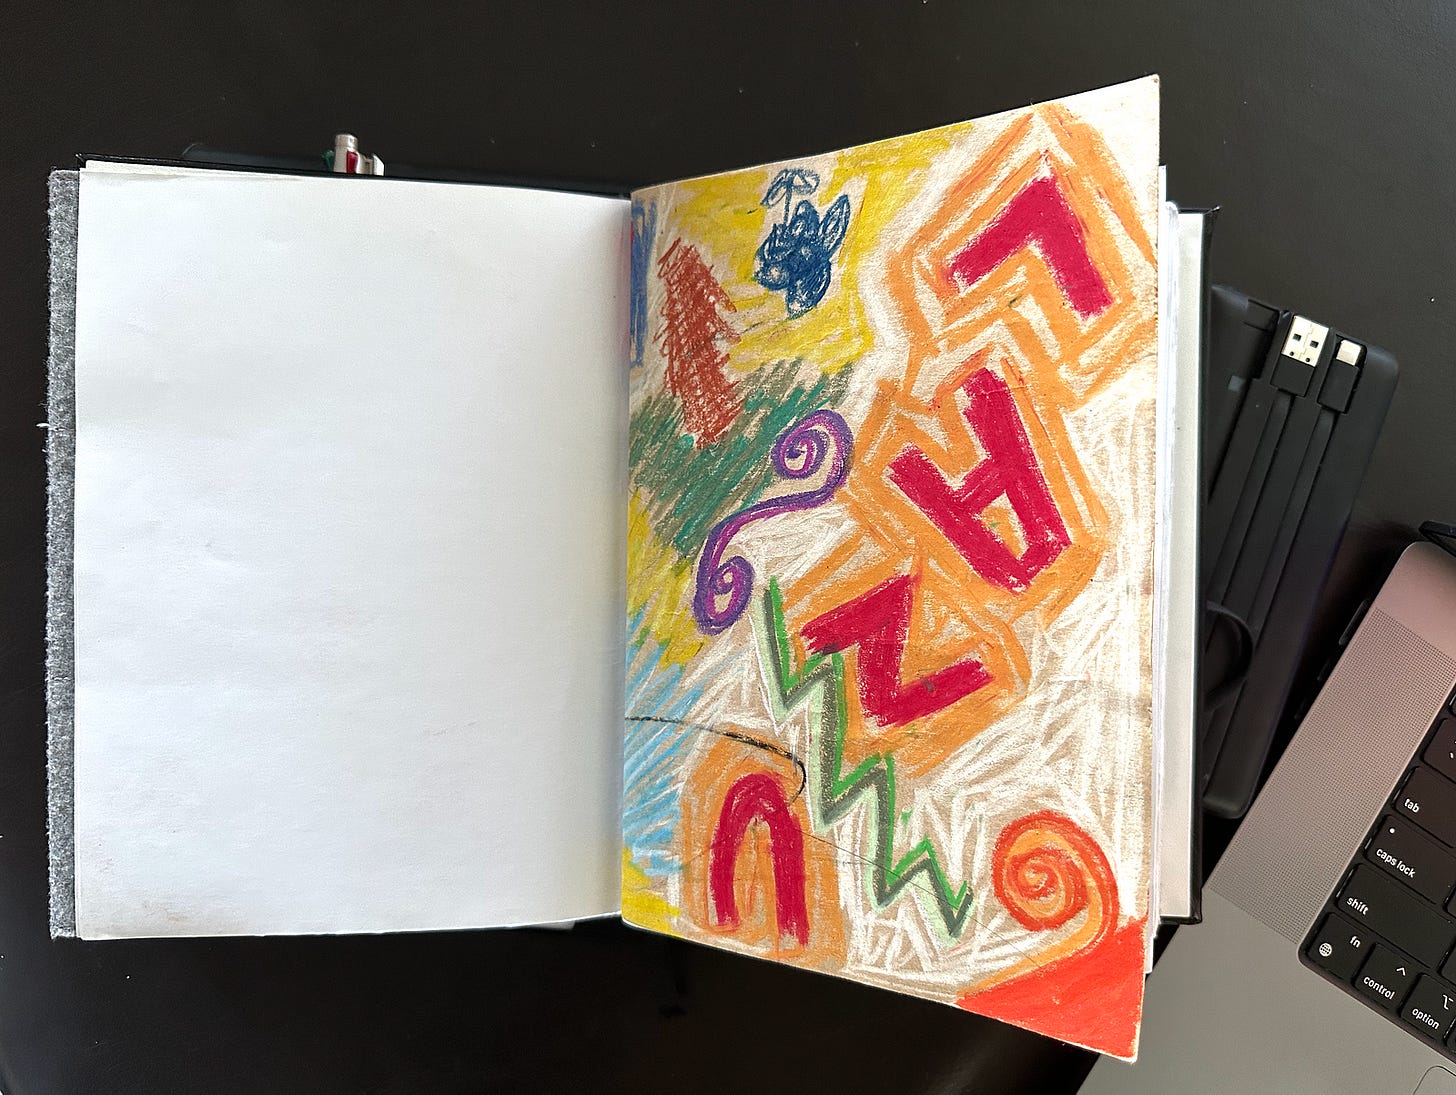 An open notebook on a dark background, with an adult’s crayon drawing on brown paper on the right hand page.